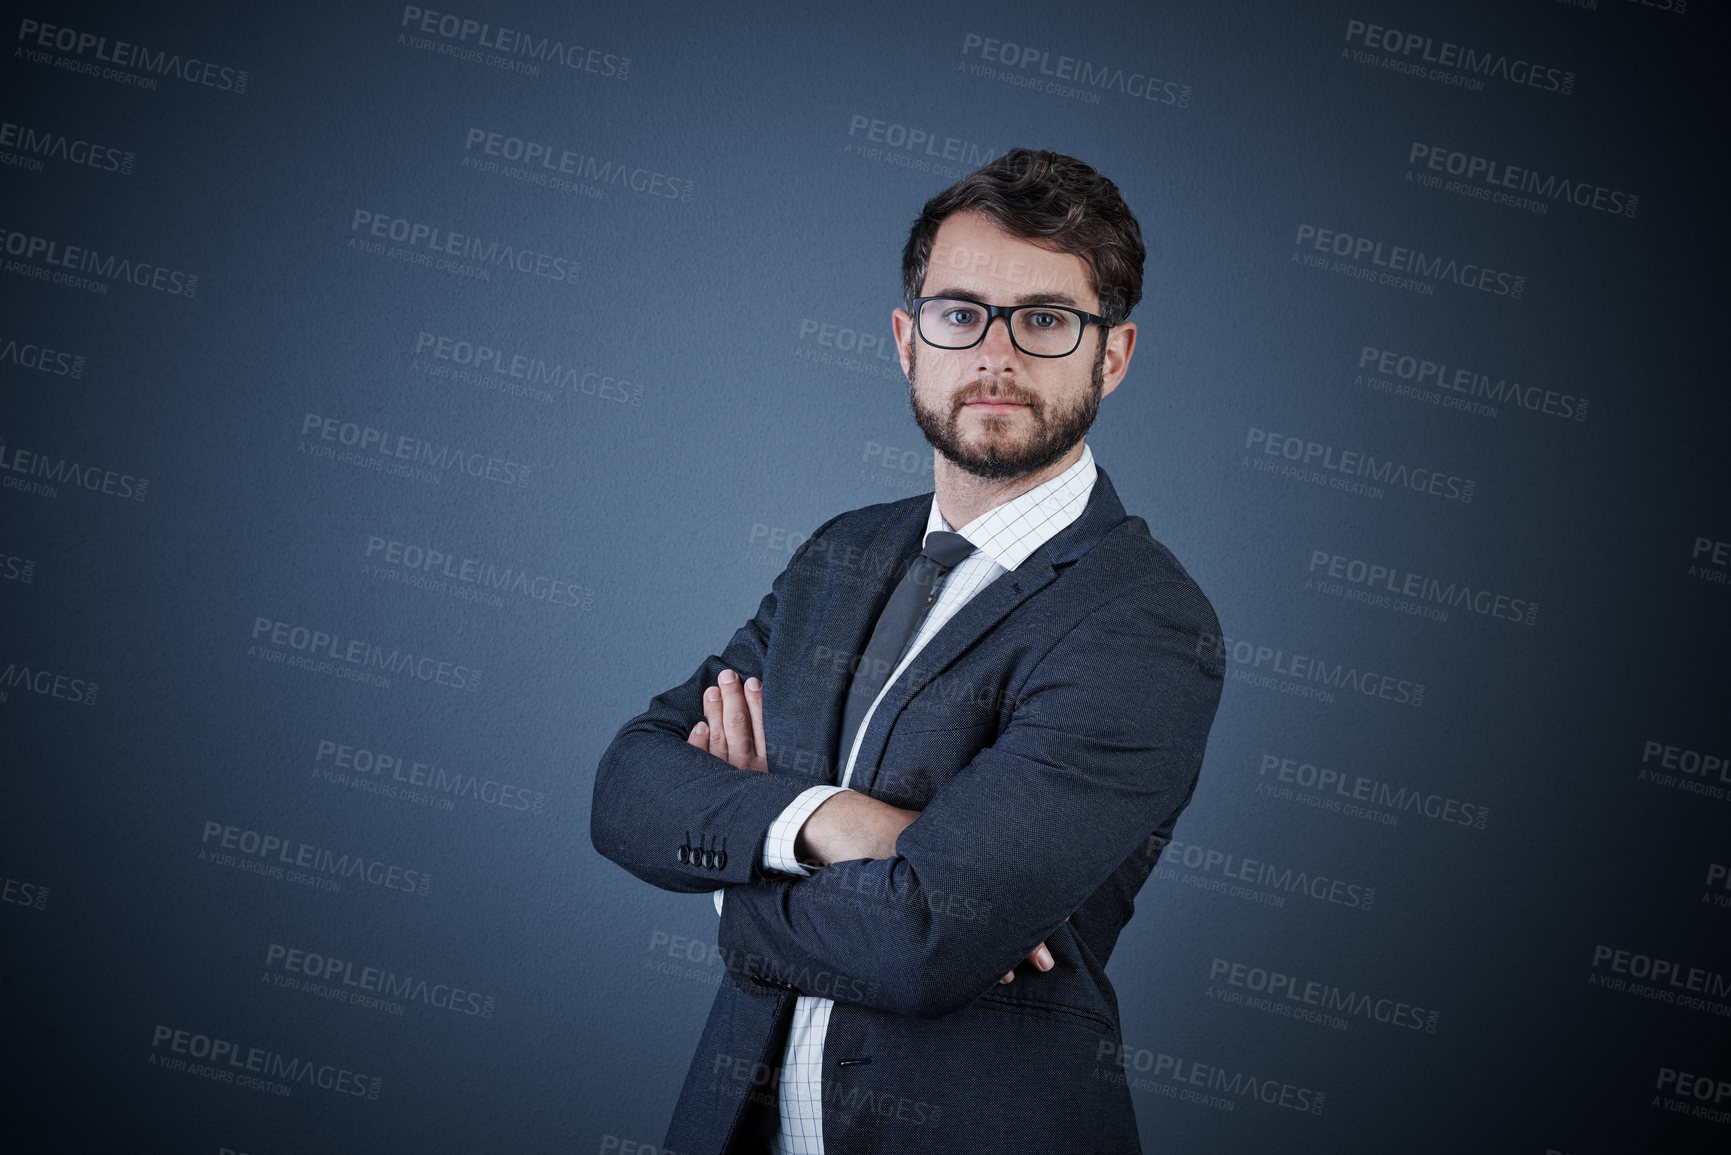 Buy stock photo Studio portrait of a handsome young businessman standing with his arms crossed against a dark background